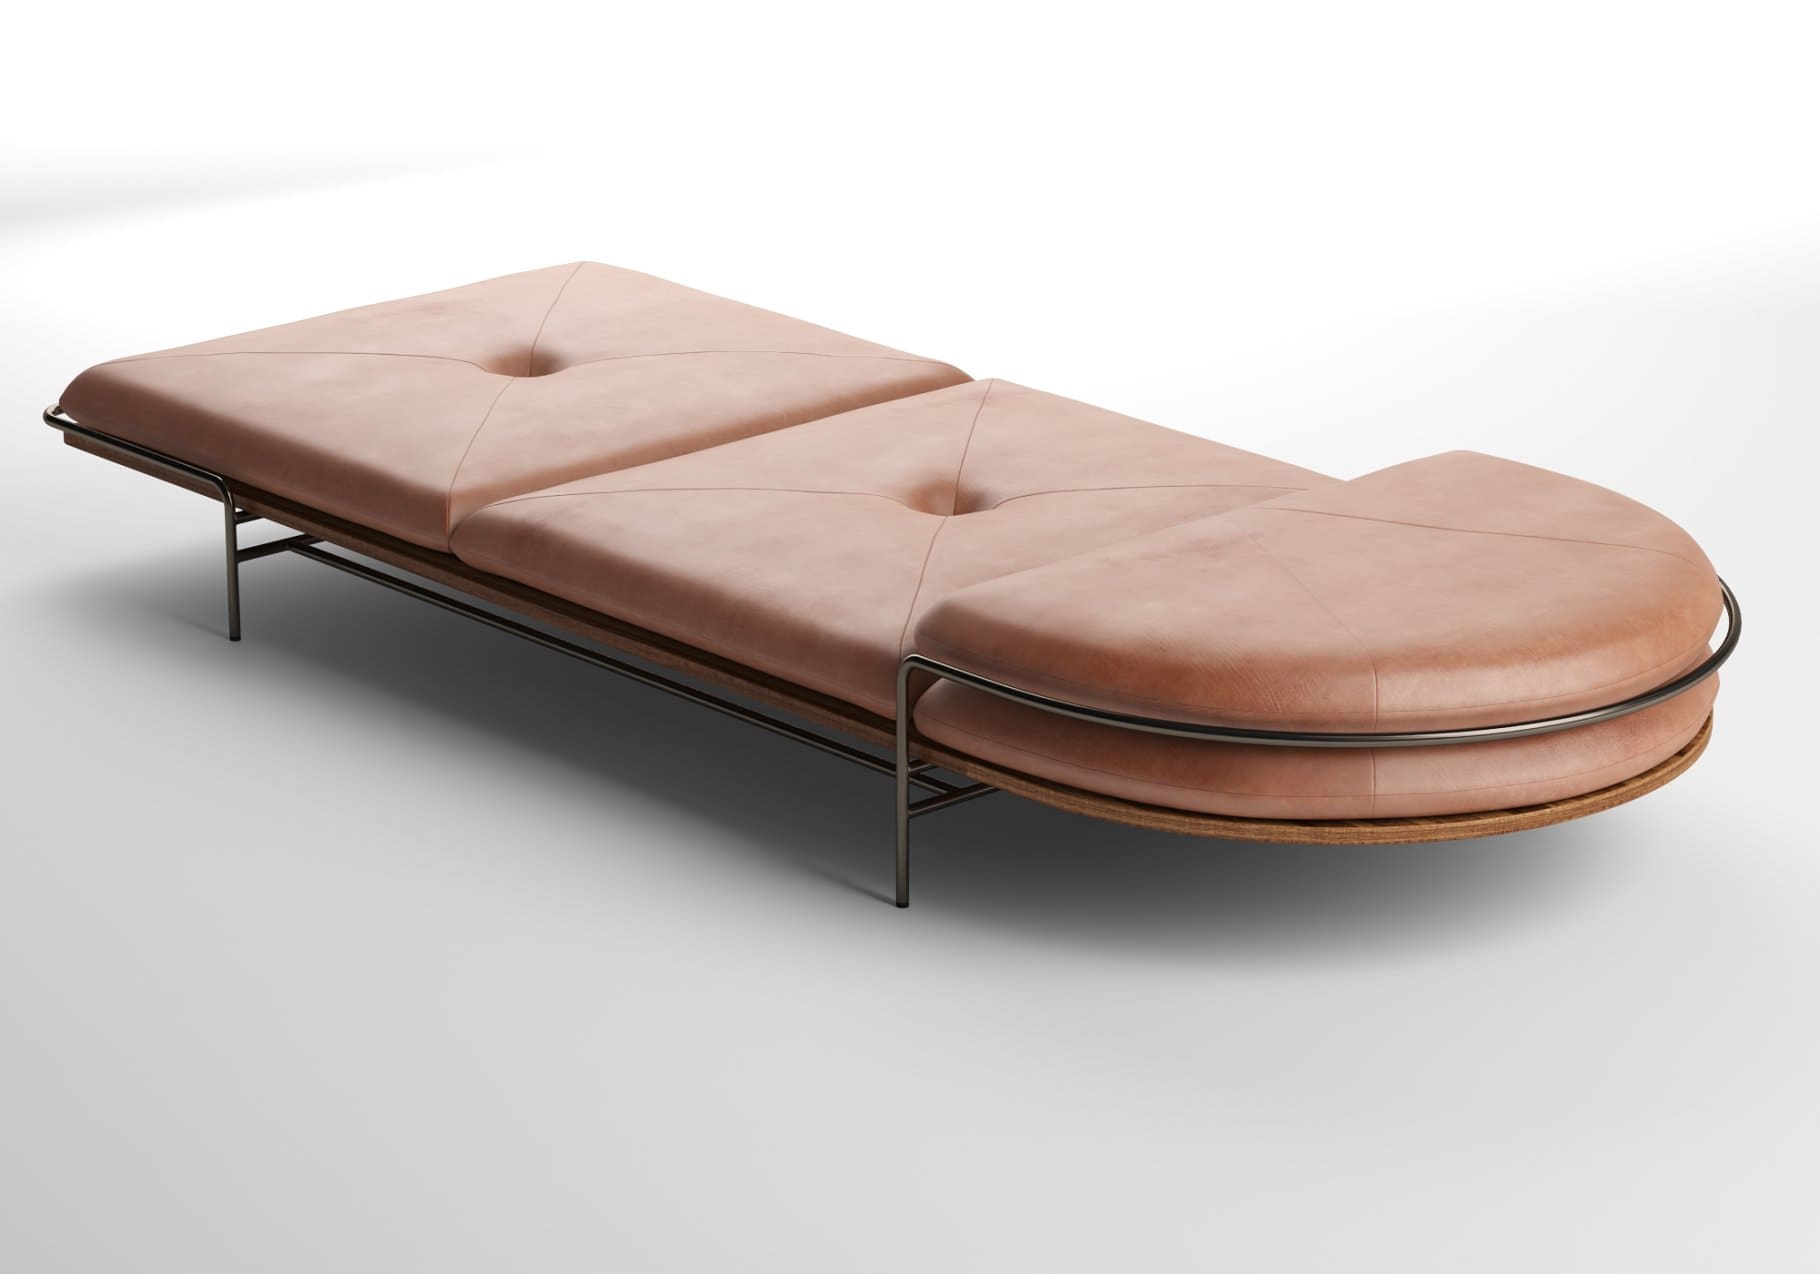 A close-up of the Geometric Daybed by Bassam fellows.